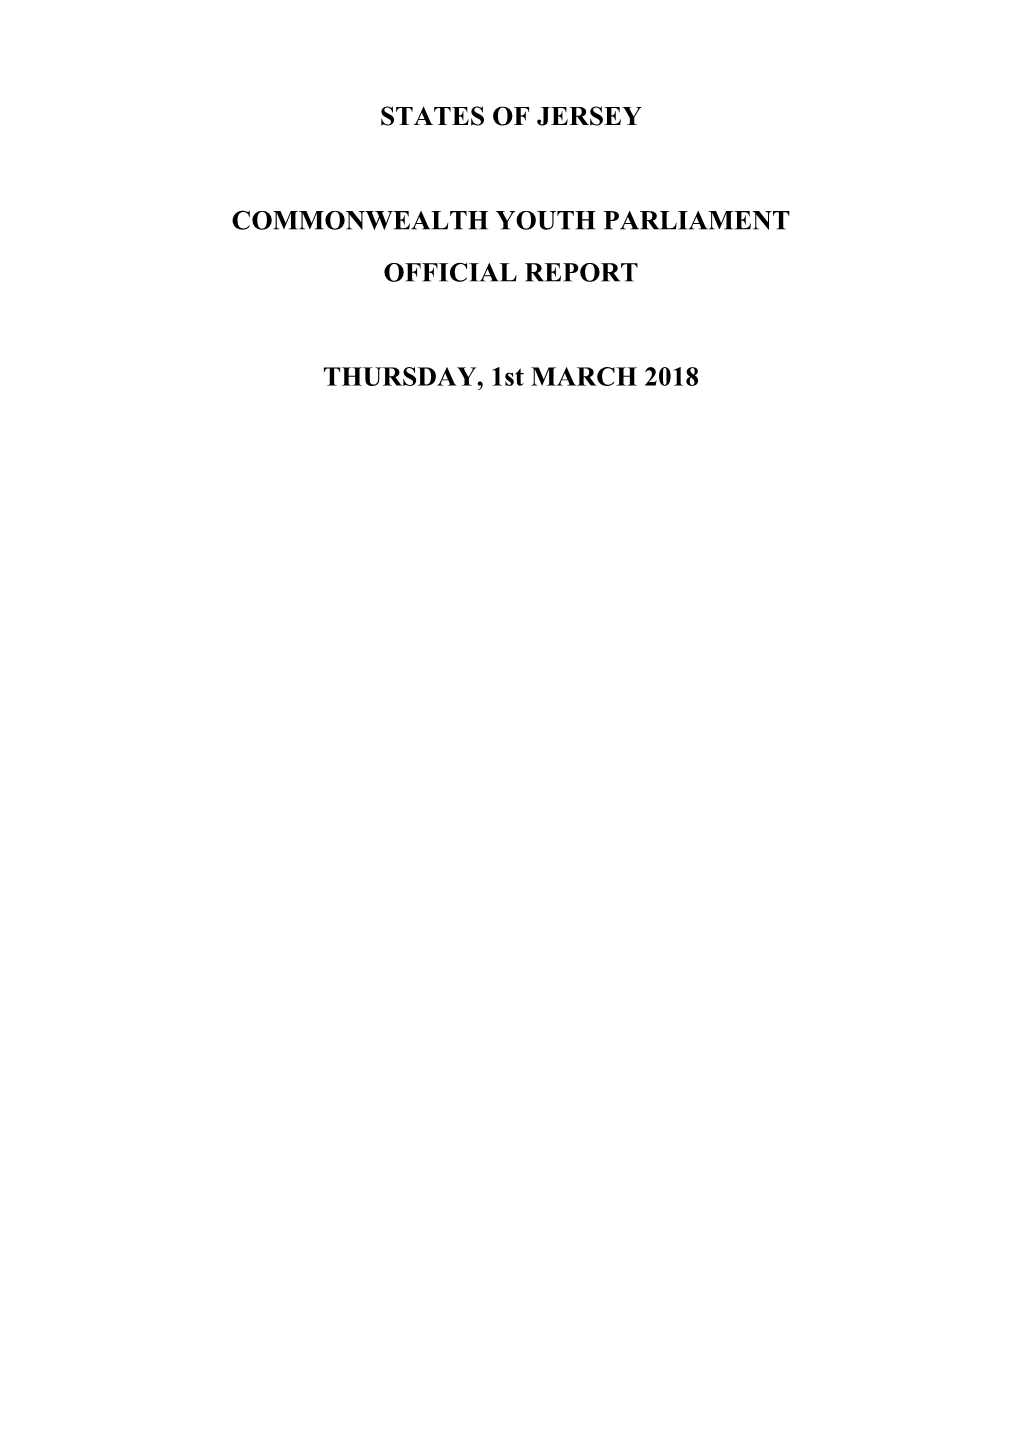 2018.03.01 Commonwealth Youth Parliament Transcript